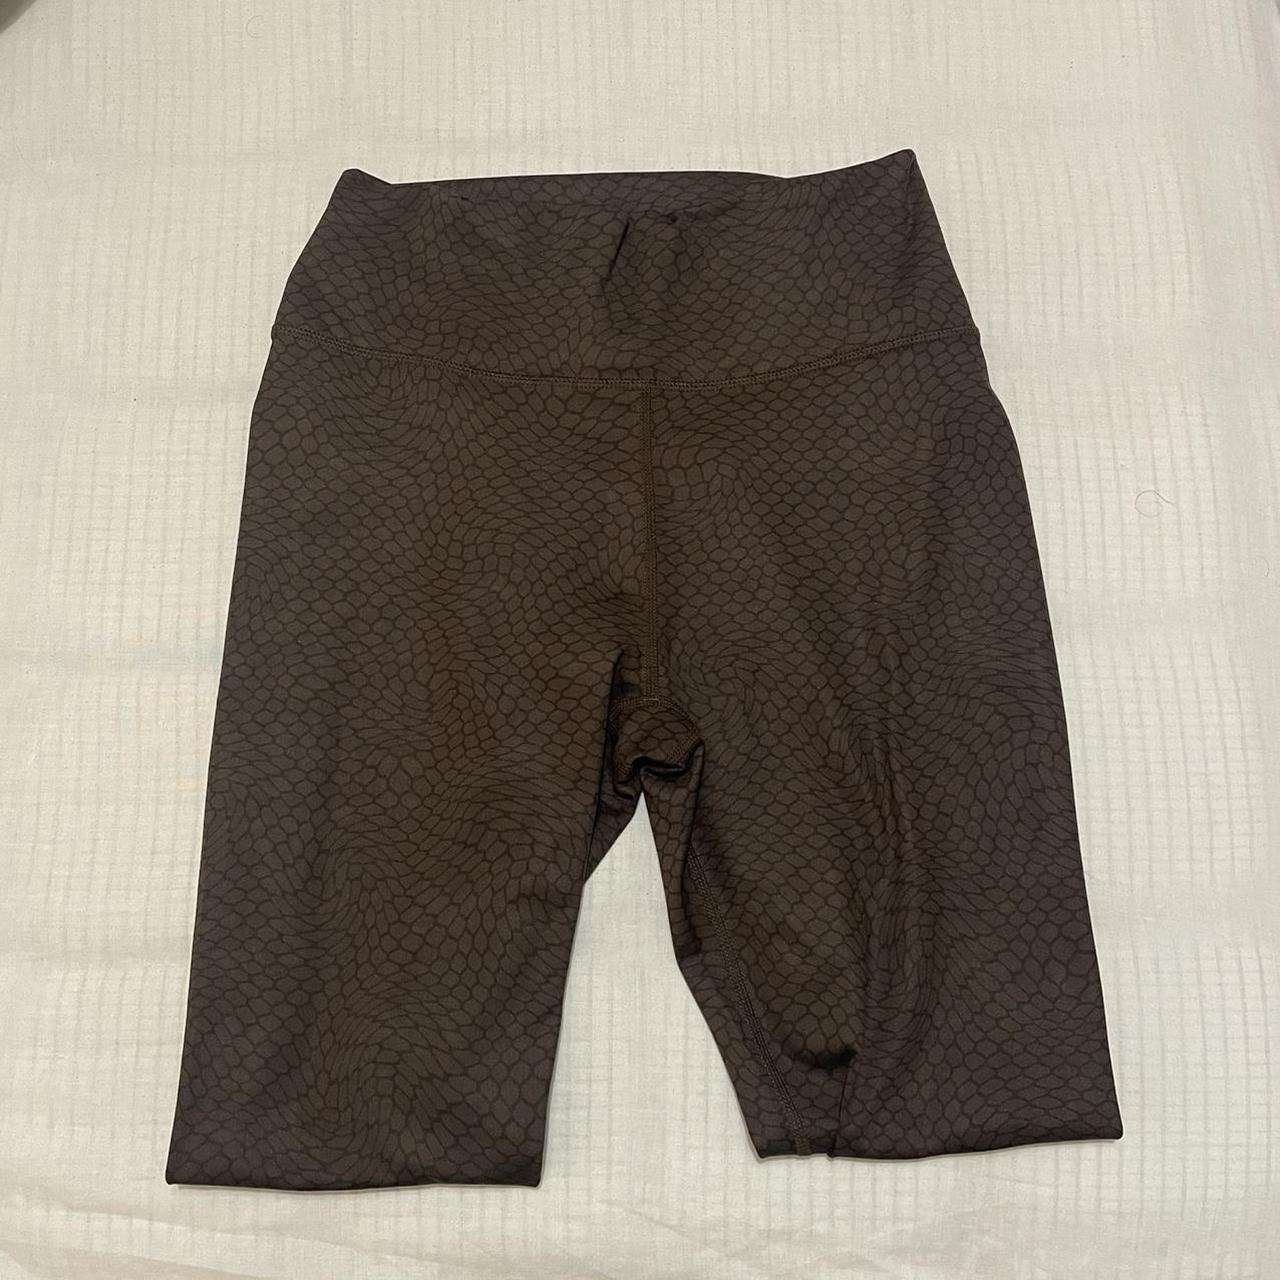 Fabletics Oasis PureLuxe High-Waisted Leggings Can - Depop